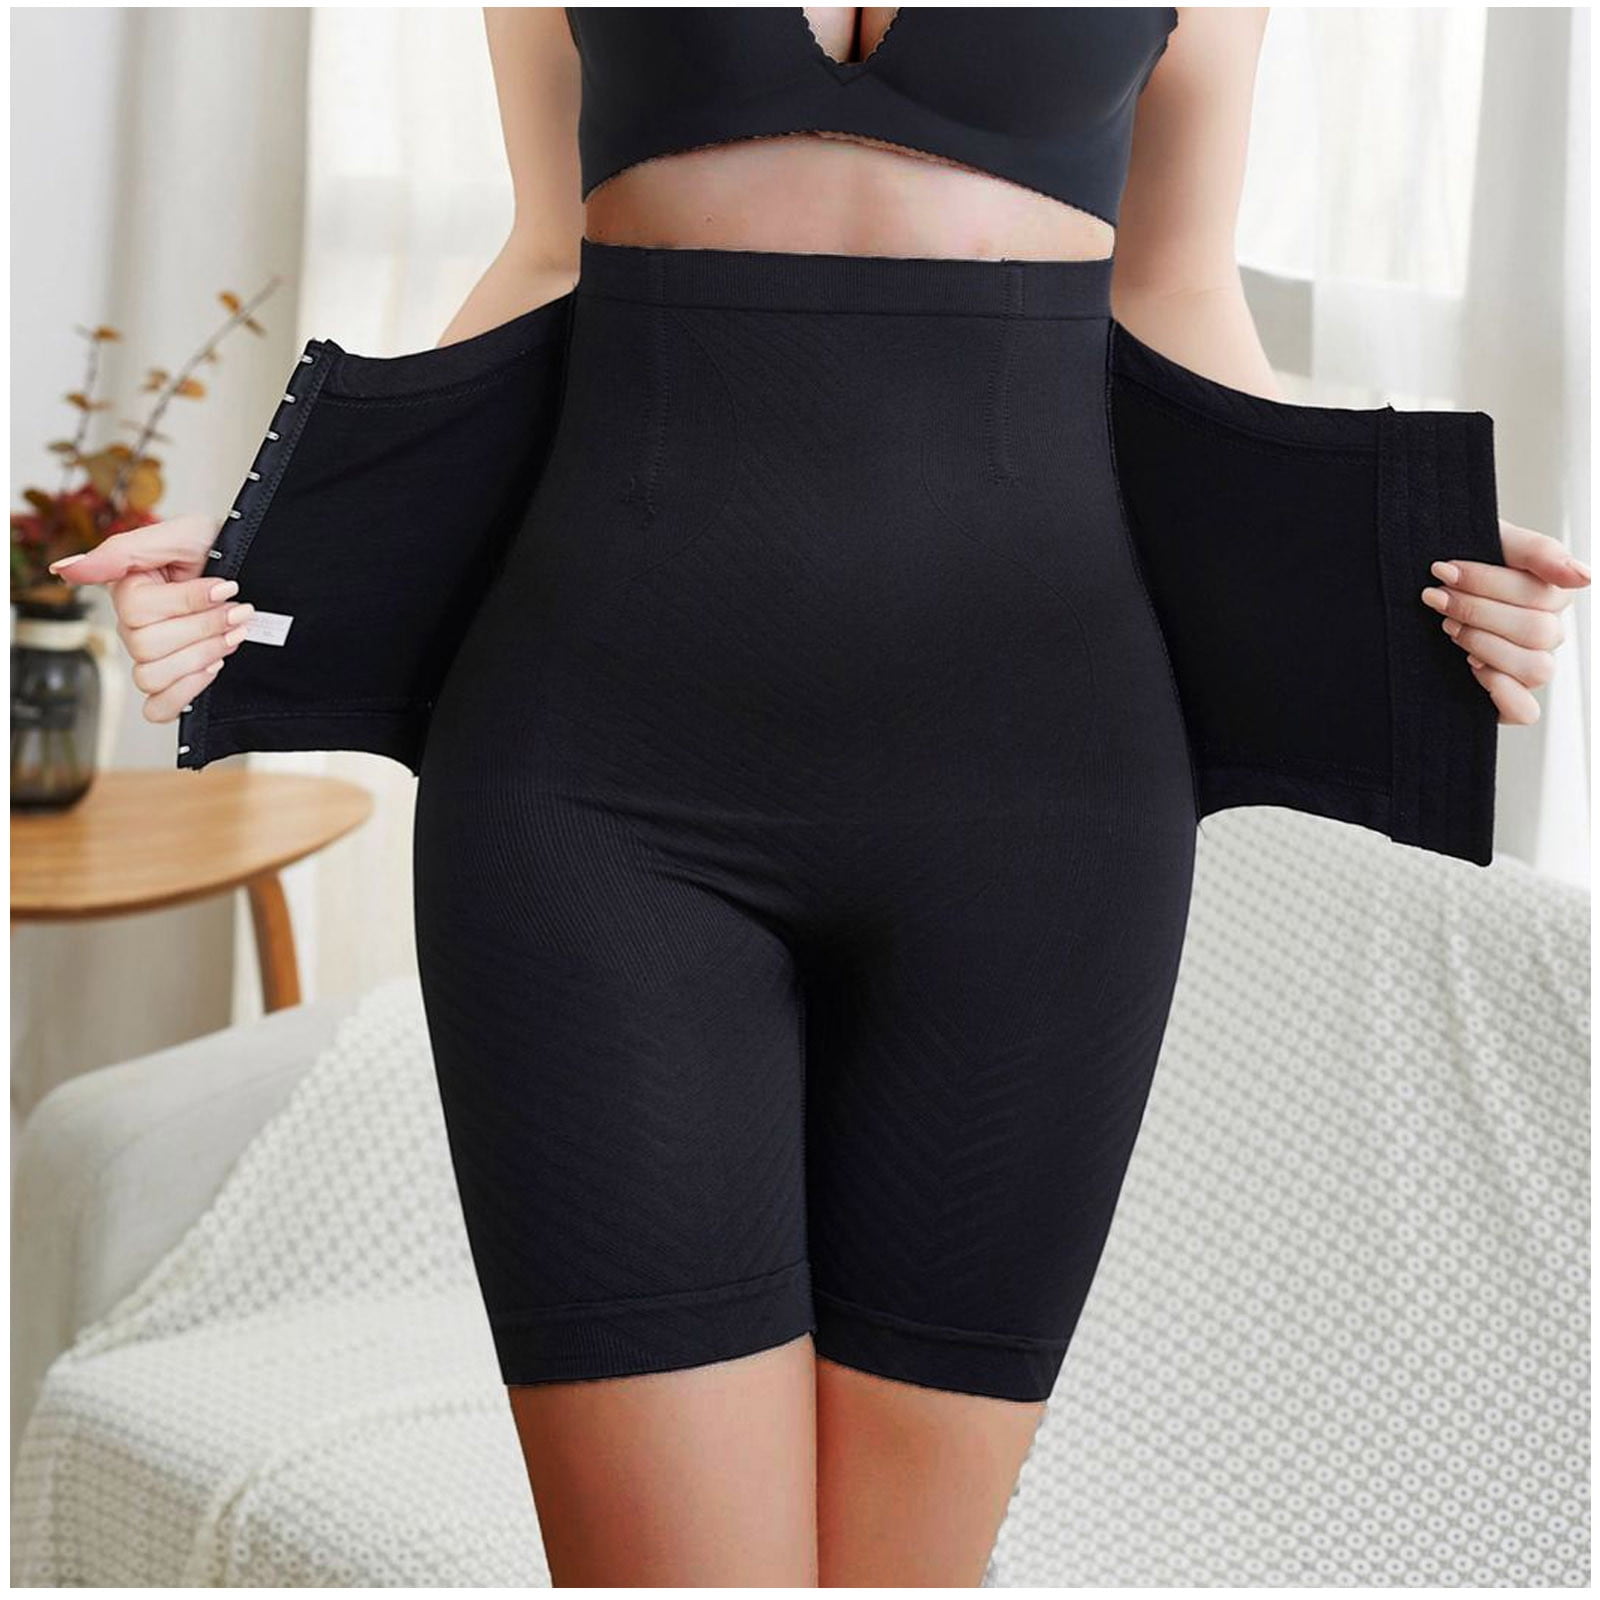 Farmacell BodyShaper 603Y - Shapewear Shorts for Women, Slimming Pants  Tummy Control, Anti Cellulite, High Waisted